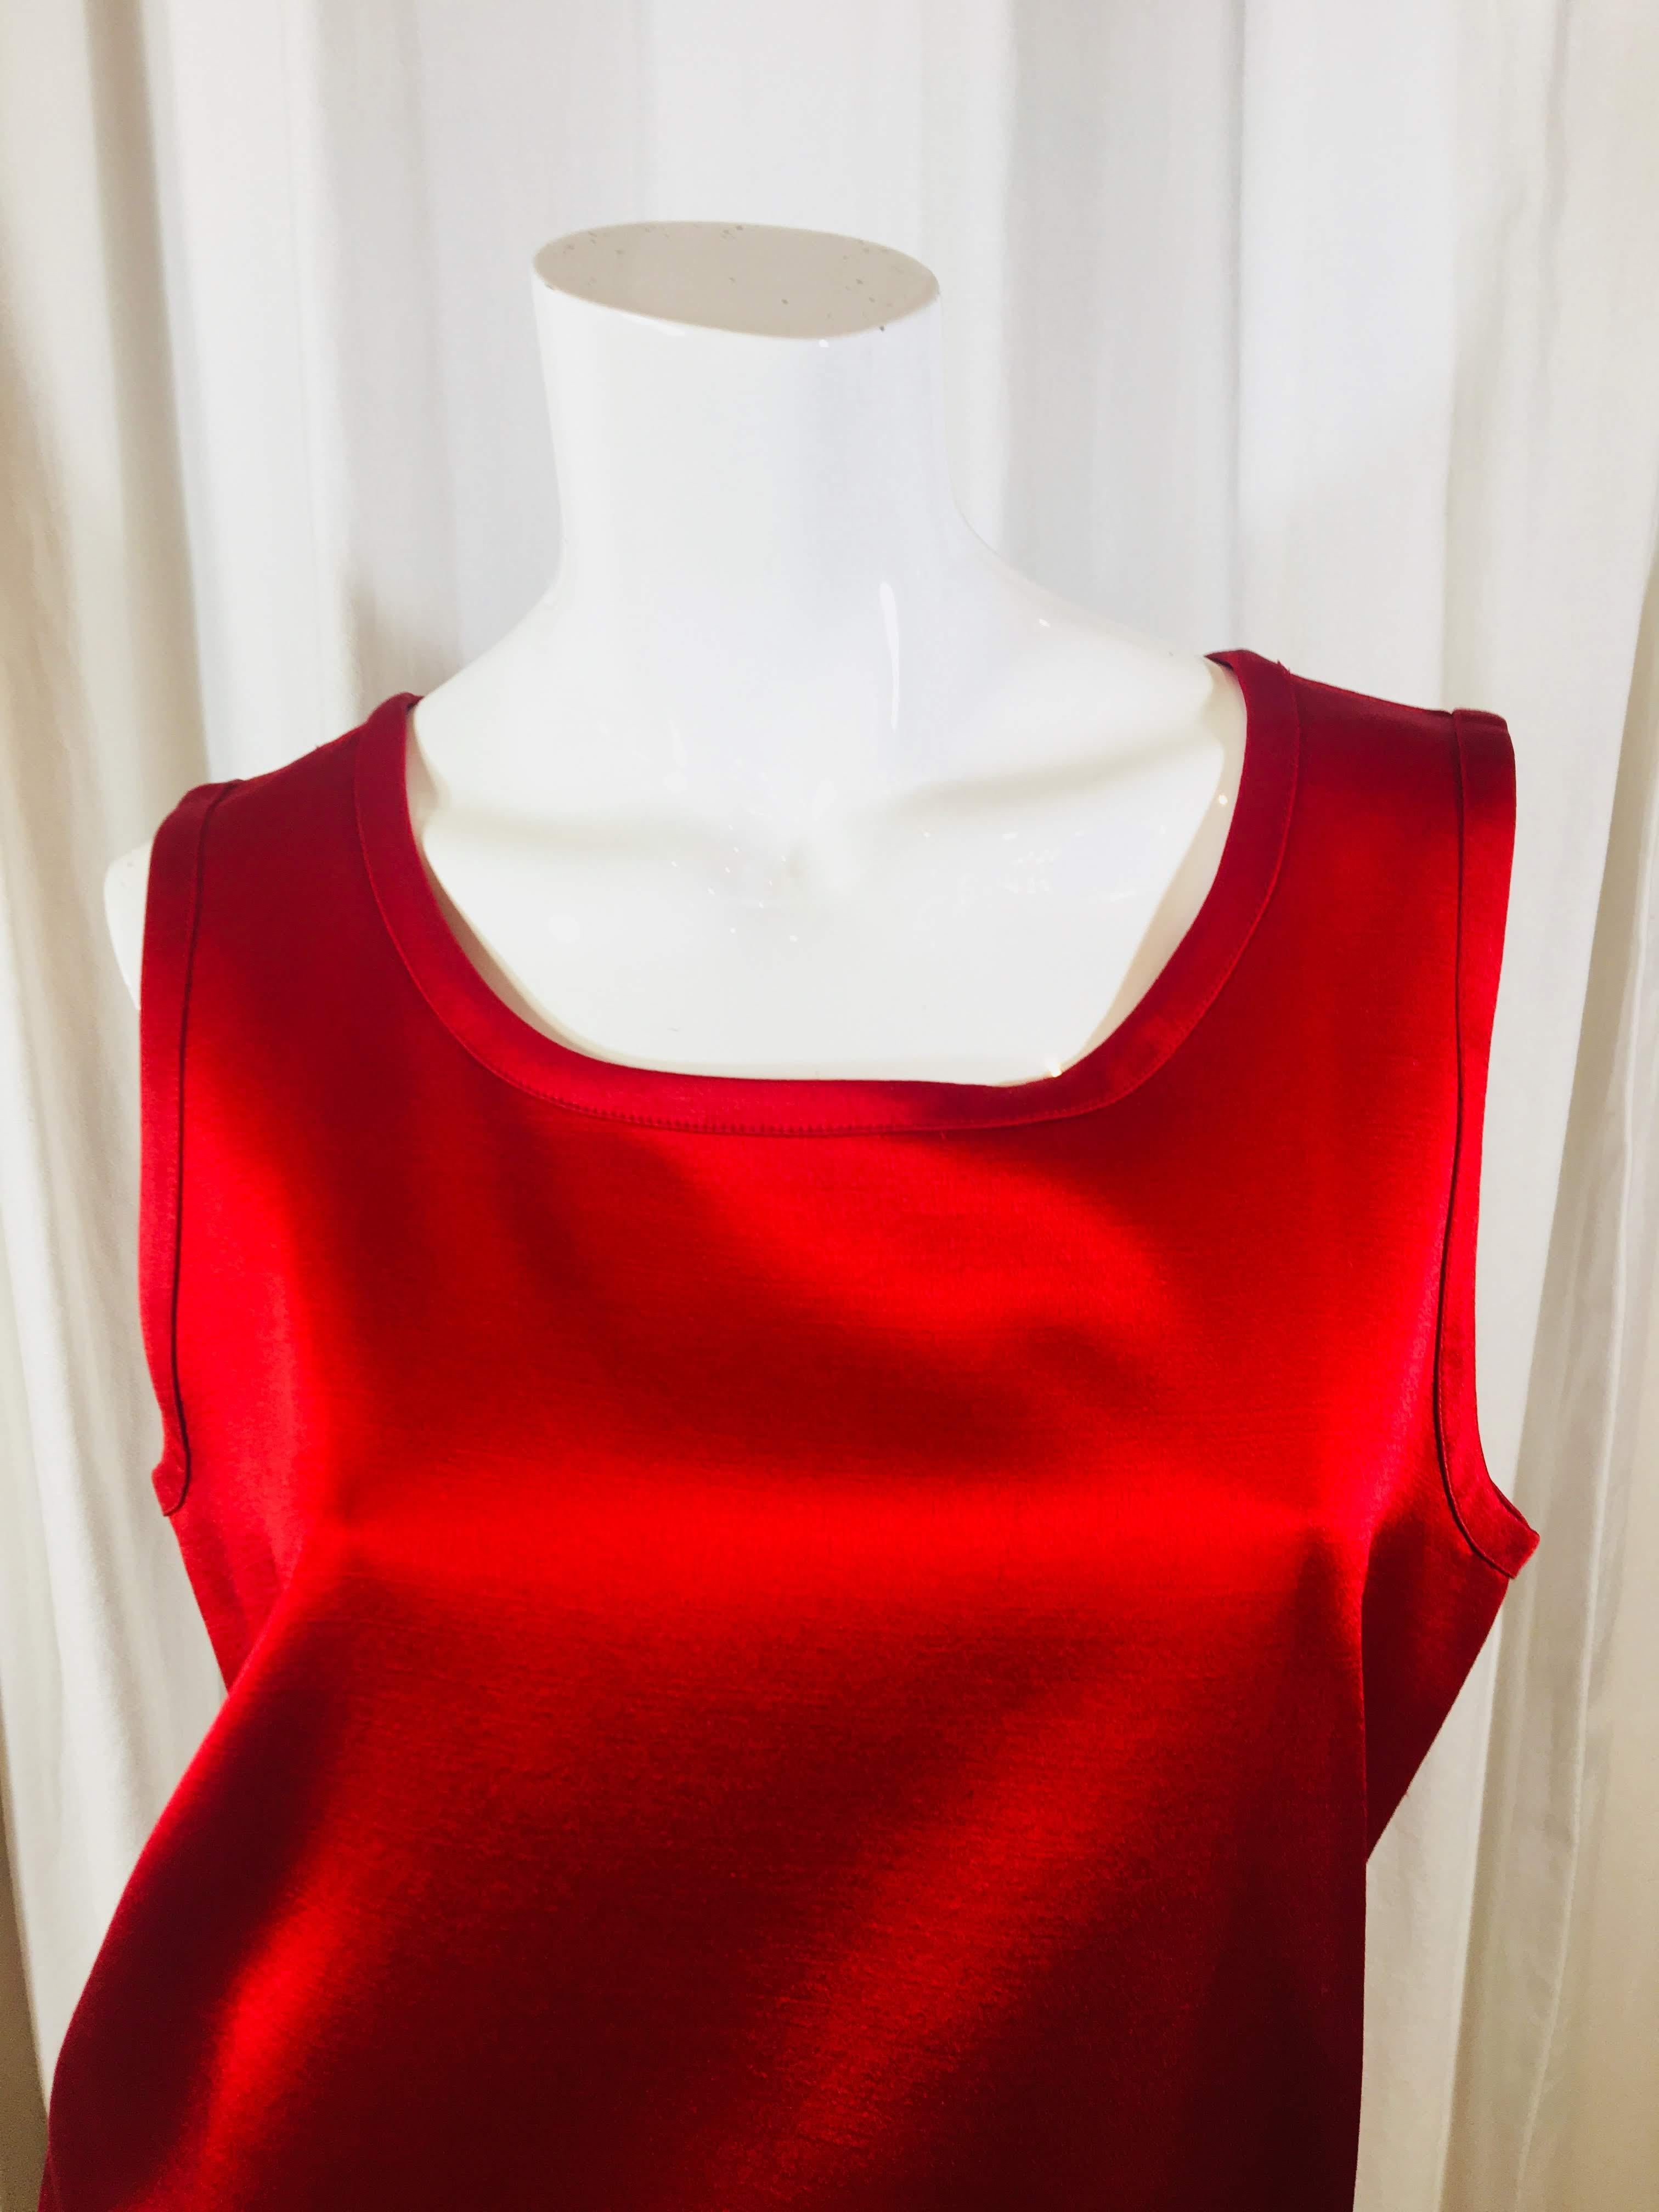 Yves Saint Laurent Tank Top in Red Silk with Boat Neckline.